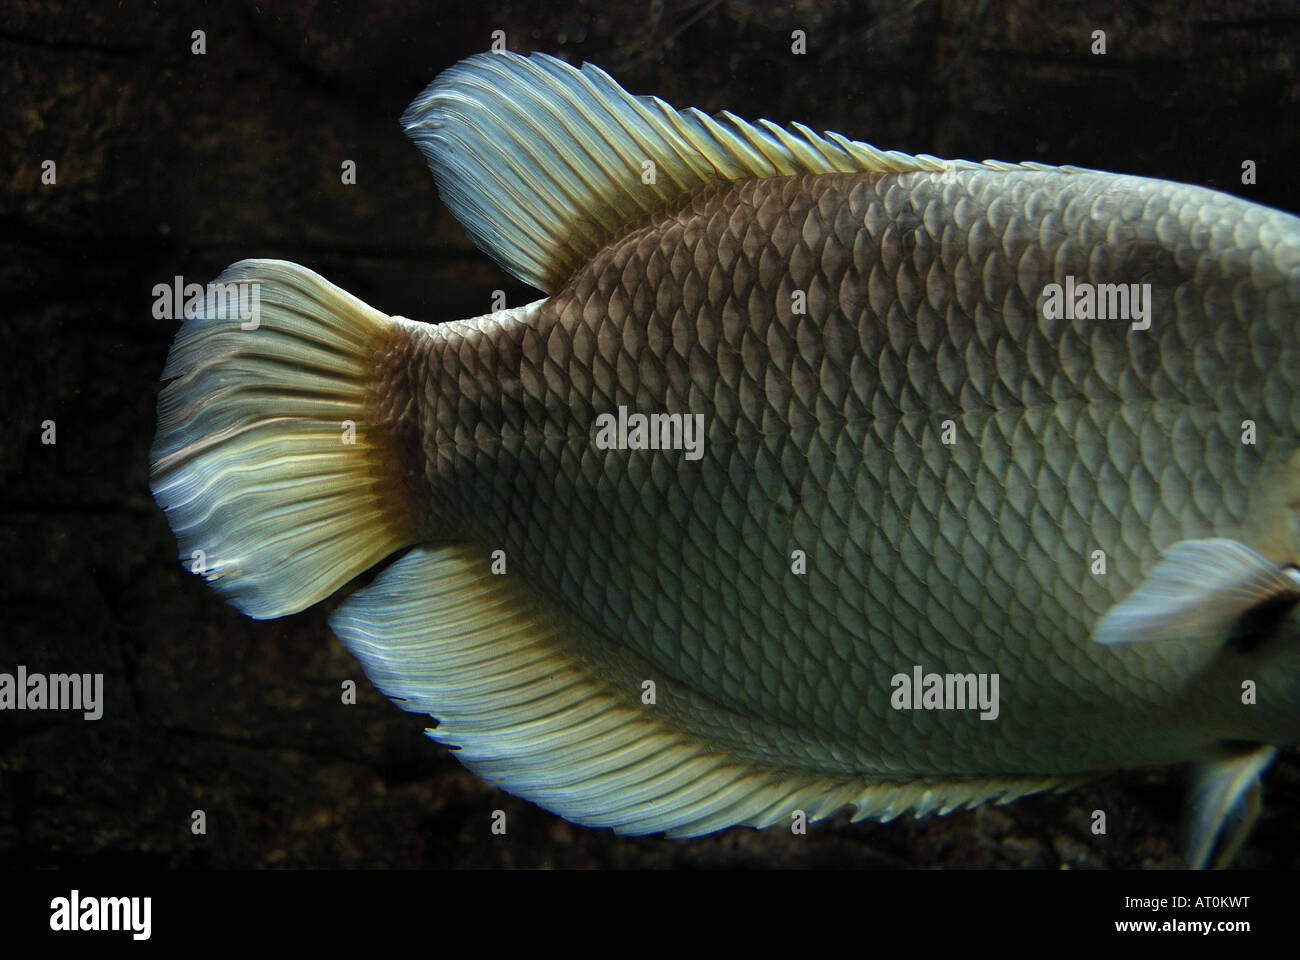 The giant gourami is an important source of food in Asia and other South Asian countries often produced by fish farming Stock Photo